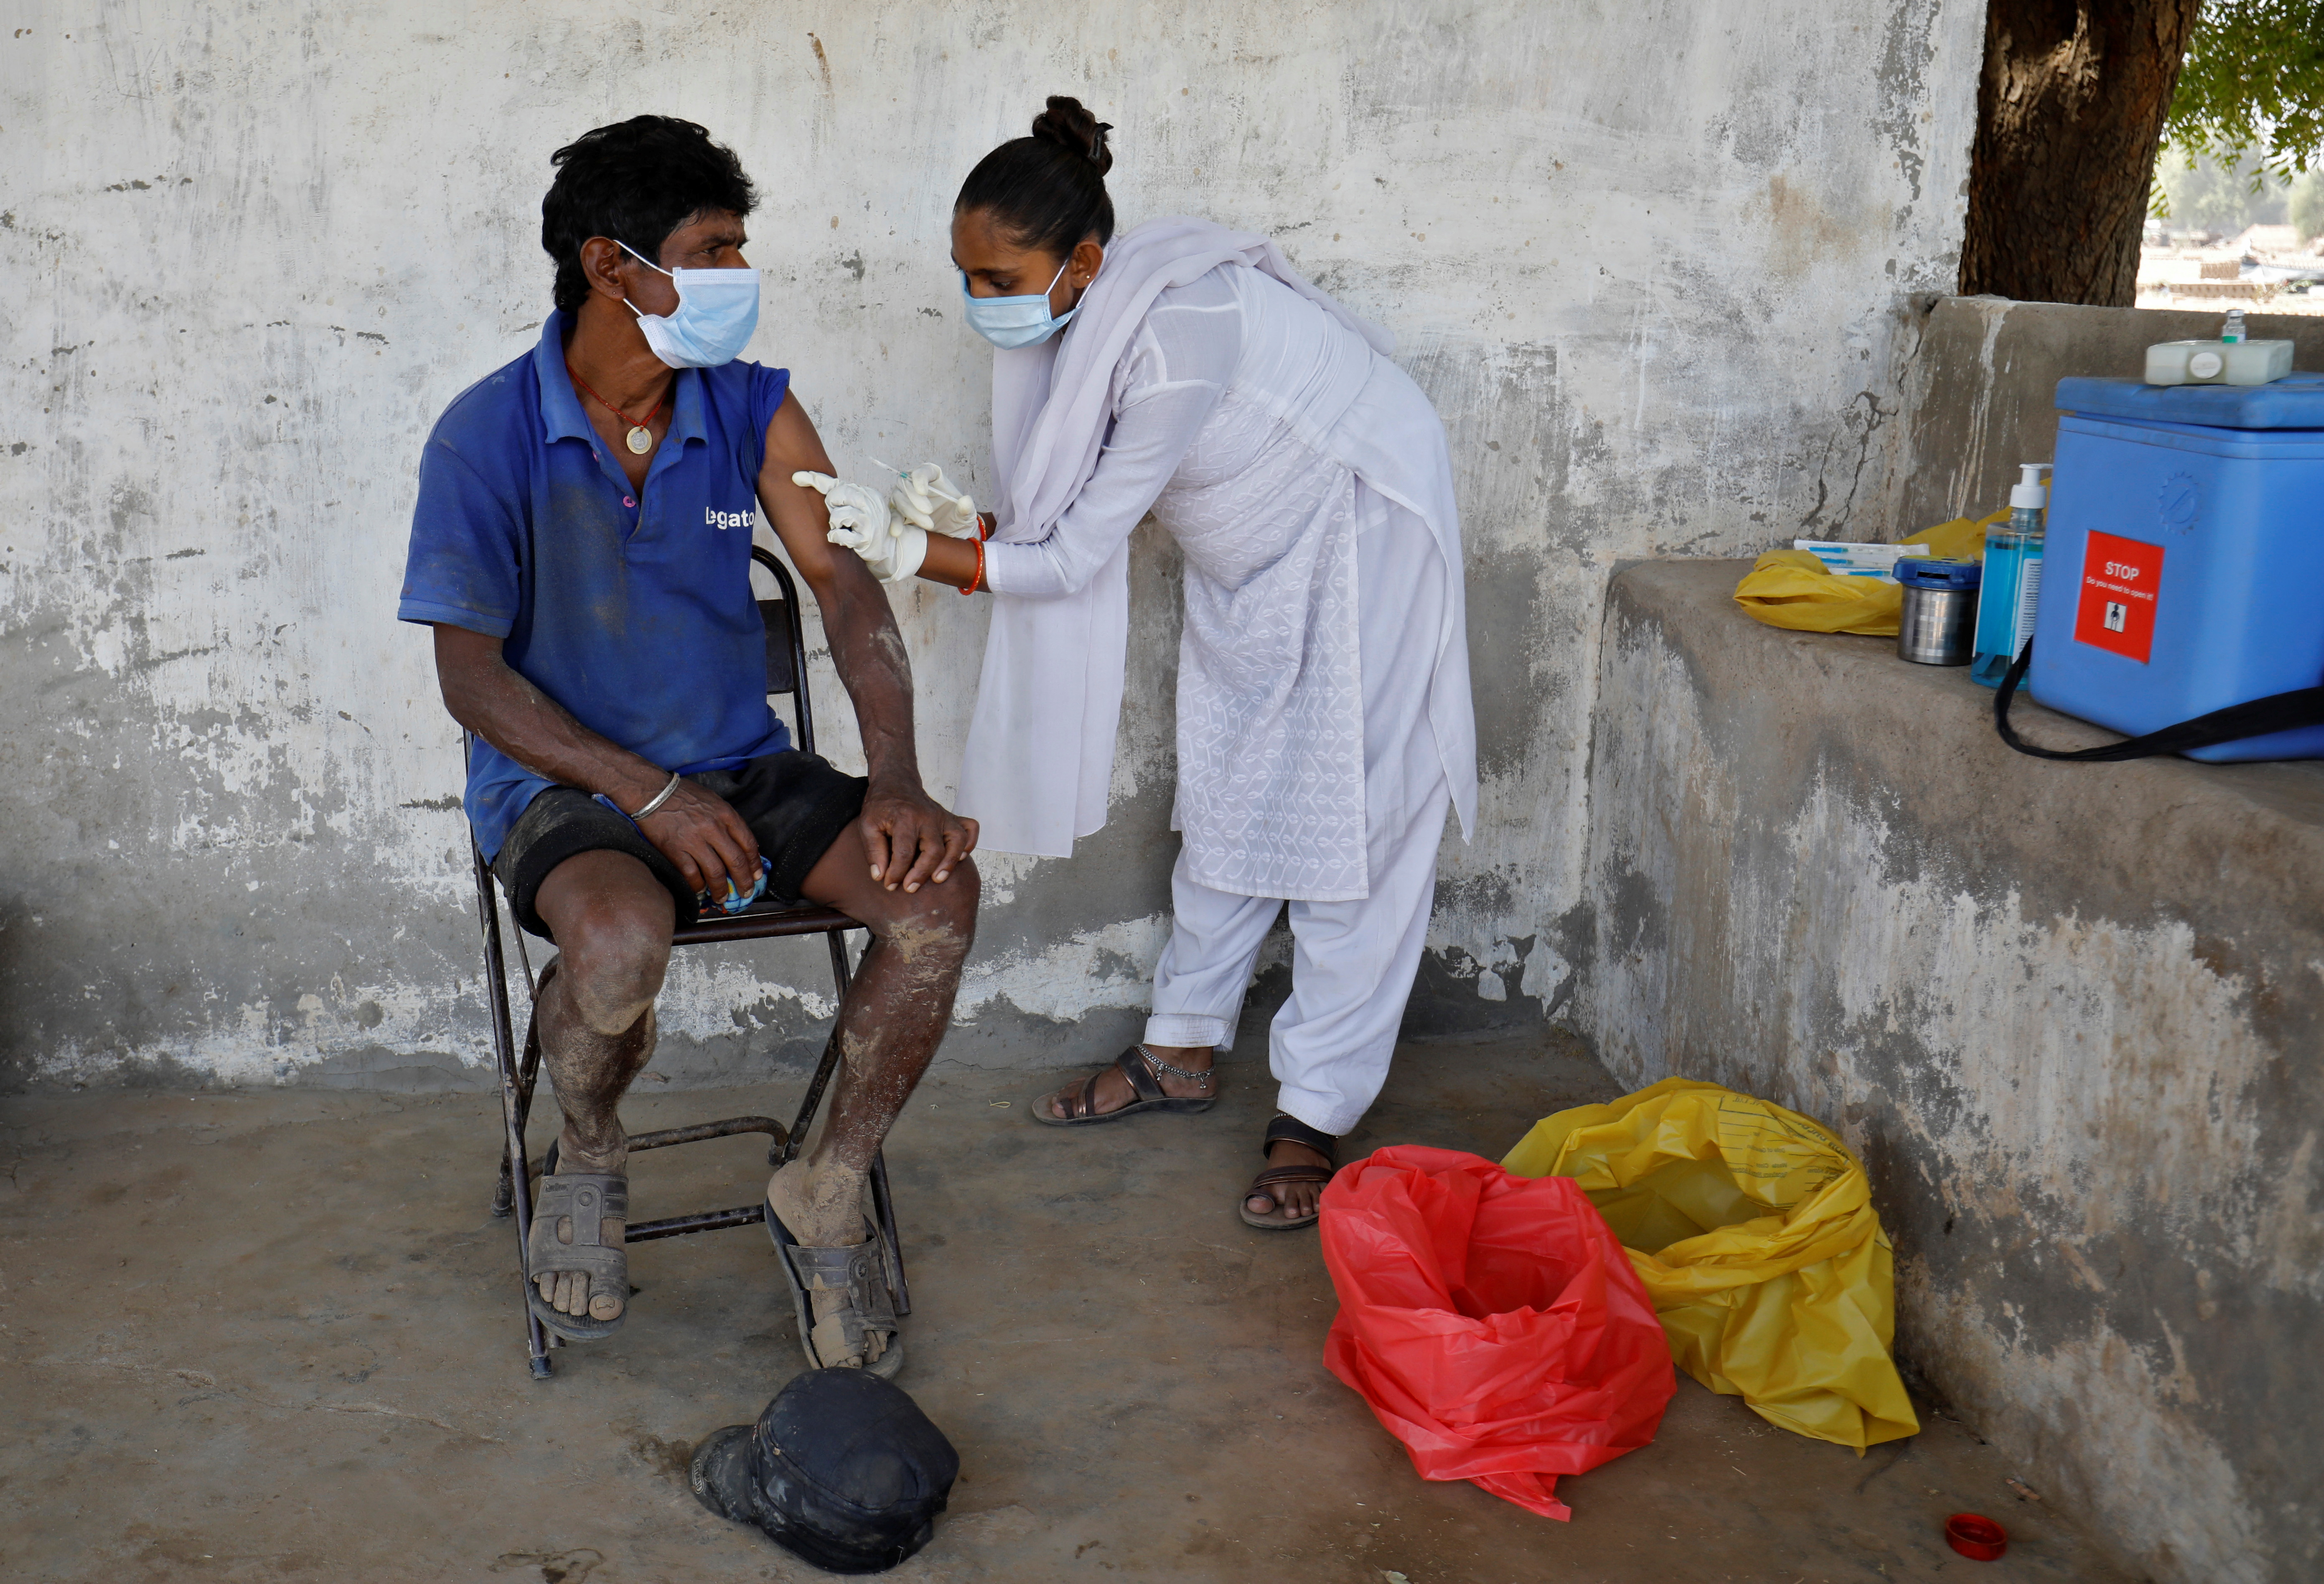 A brick kiln worker receives a dose of COVISHIELD, a coronavirus disease (COVID-19) vaccine manufactured by Serum Institute of India, at Kavitha village on the outskirts of Ahmedabad, India, April 8, 2021. REUTERS/Amit Dave